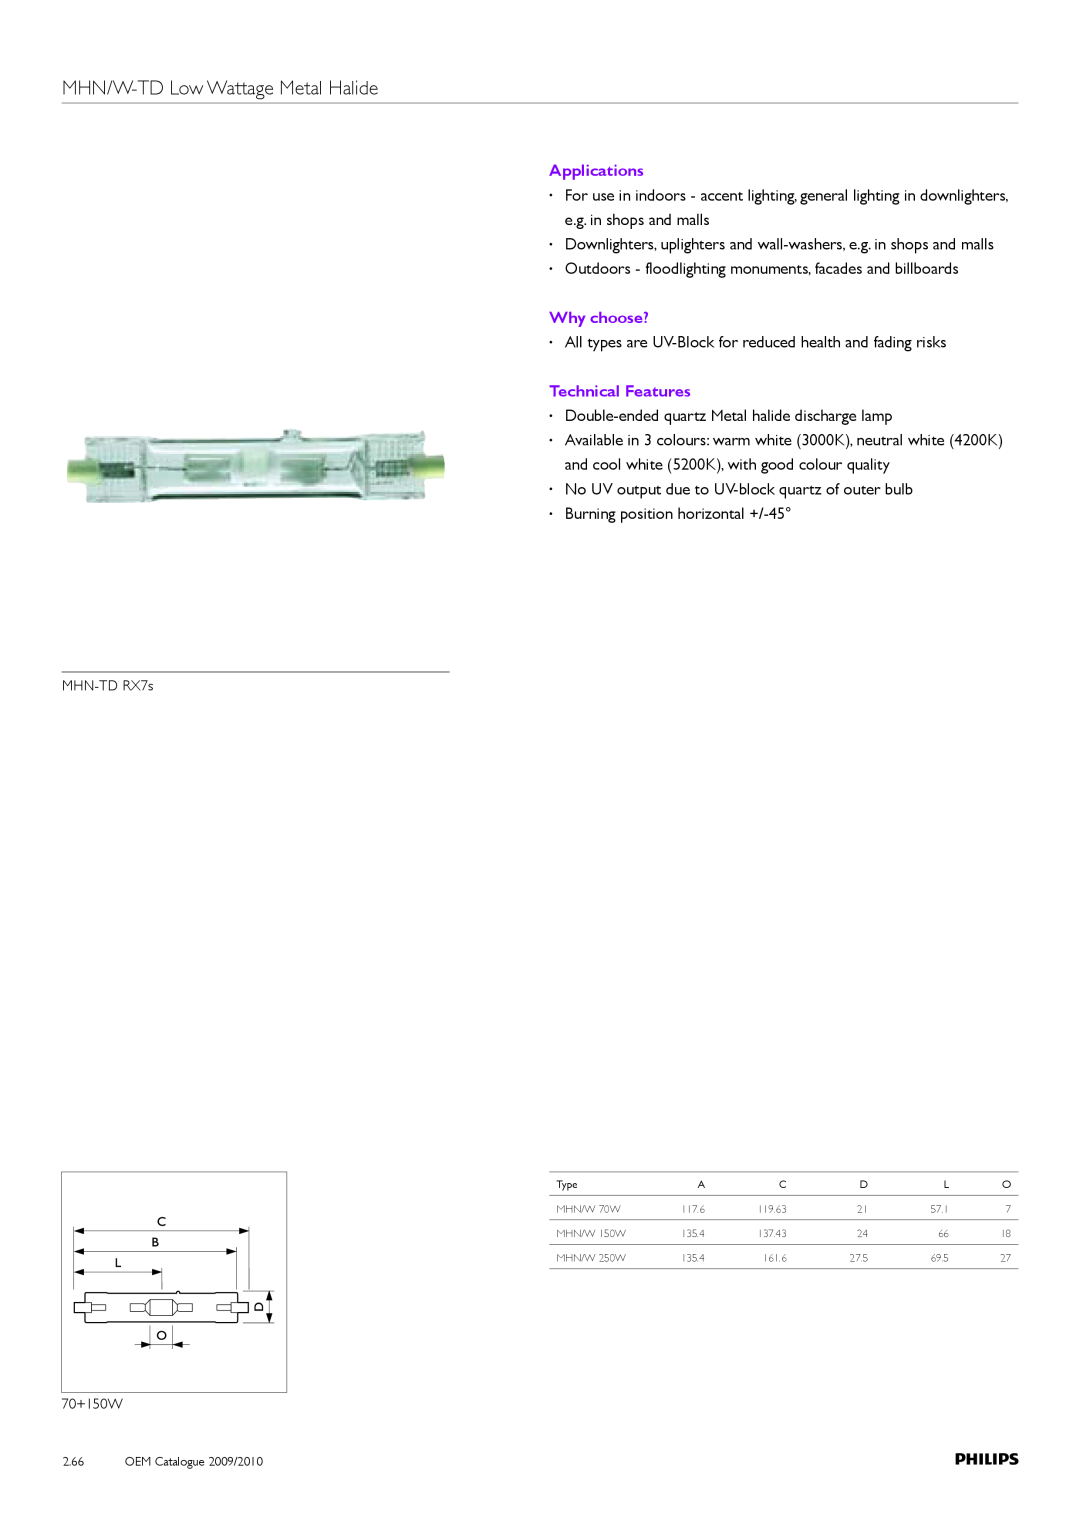 Philips Compact HID Lamp and Gear manual MHN/W-TDLow Wattage Metal Halide, Applications, Why choose?, Technical Features 